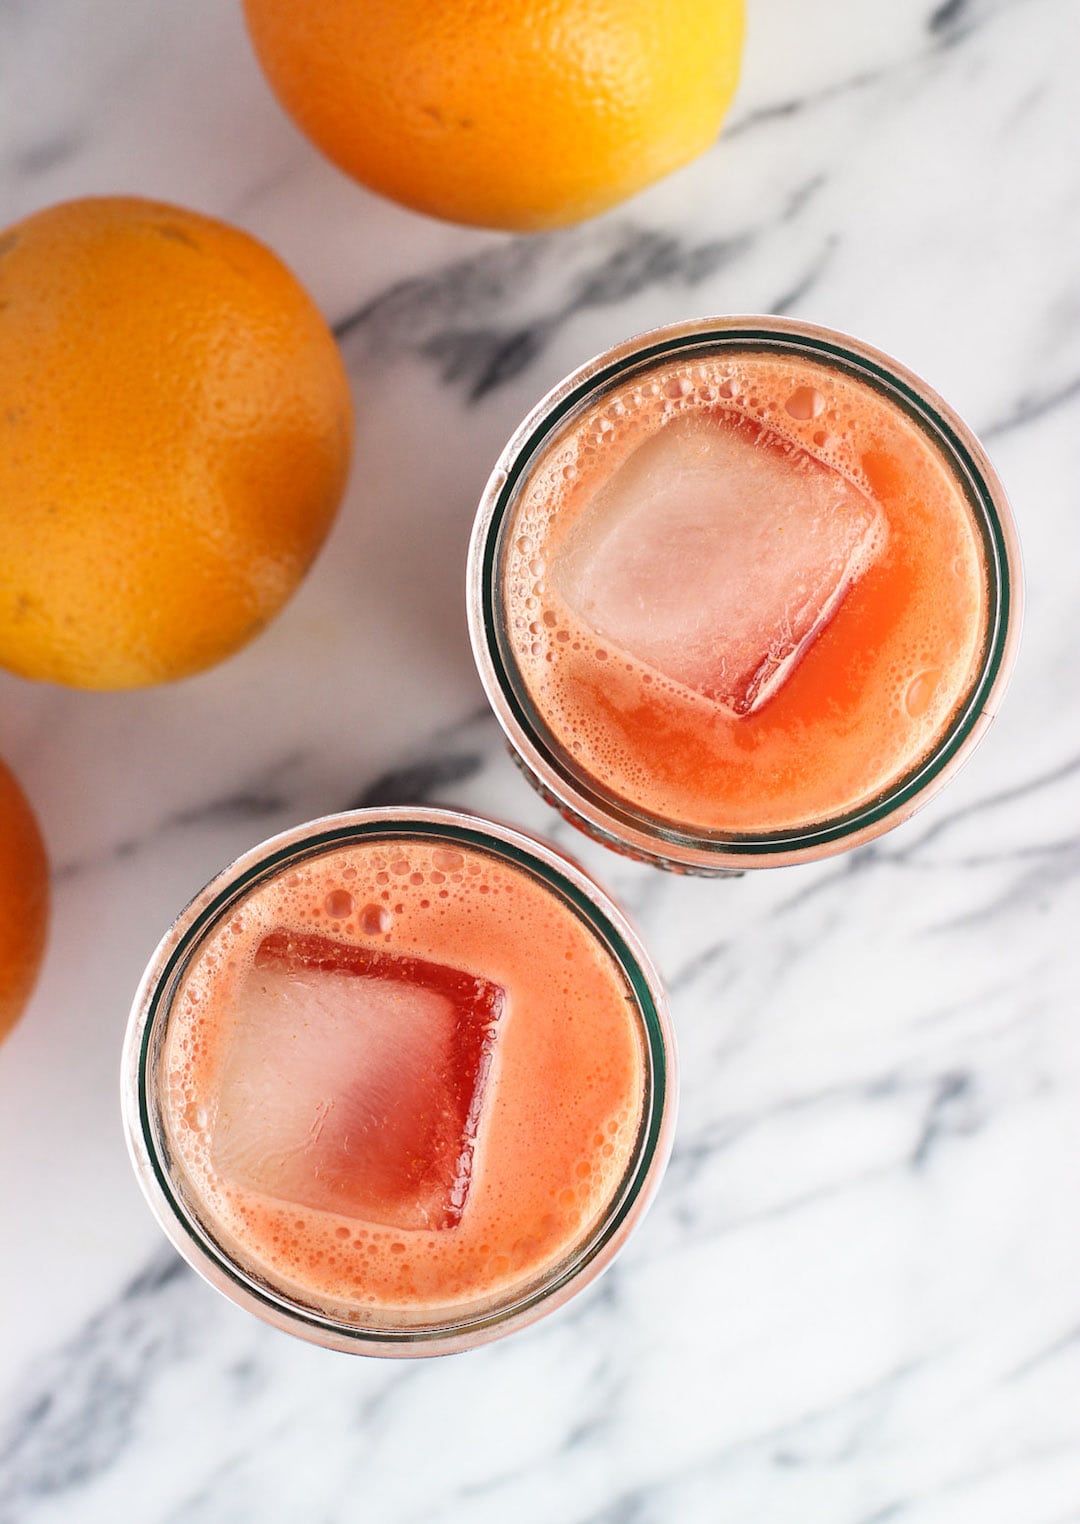 Orange carrot juice in two glasses with ice cubes